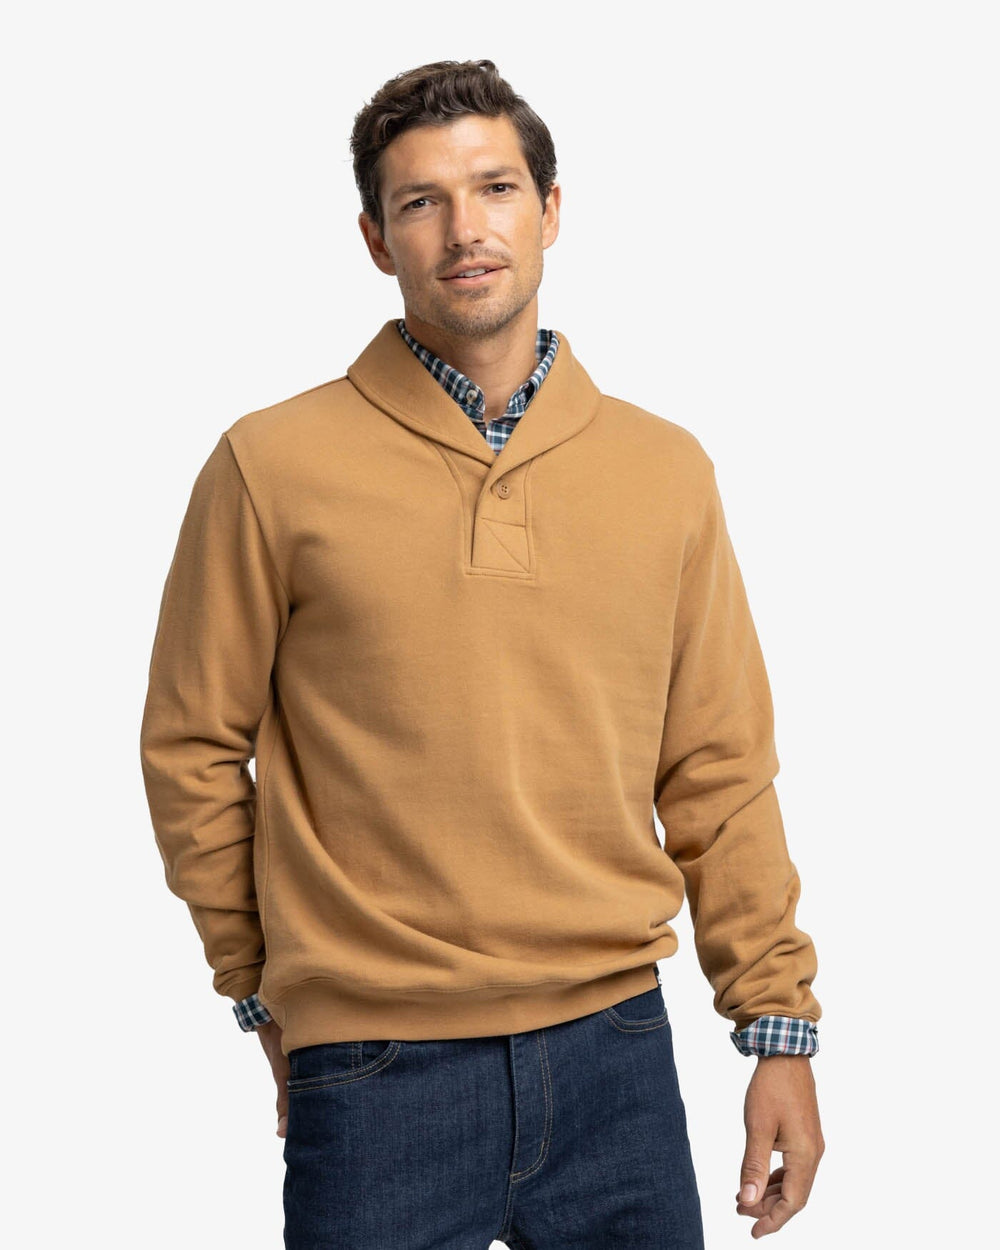 The front view of the Southern Tide Stanley Pullover by Southern Tide - Hazelnut Khaki